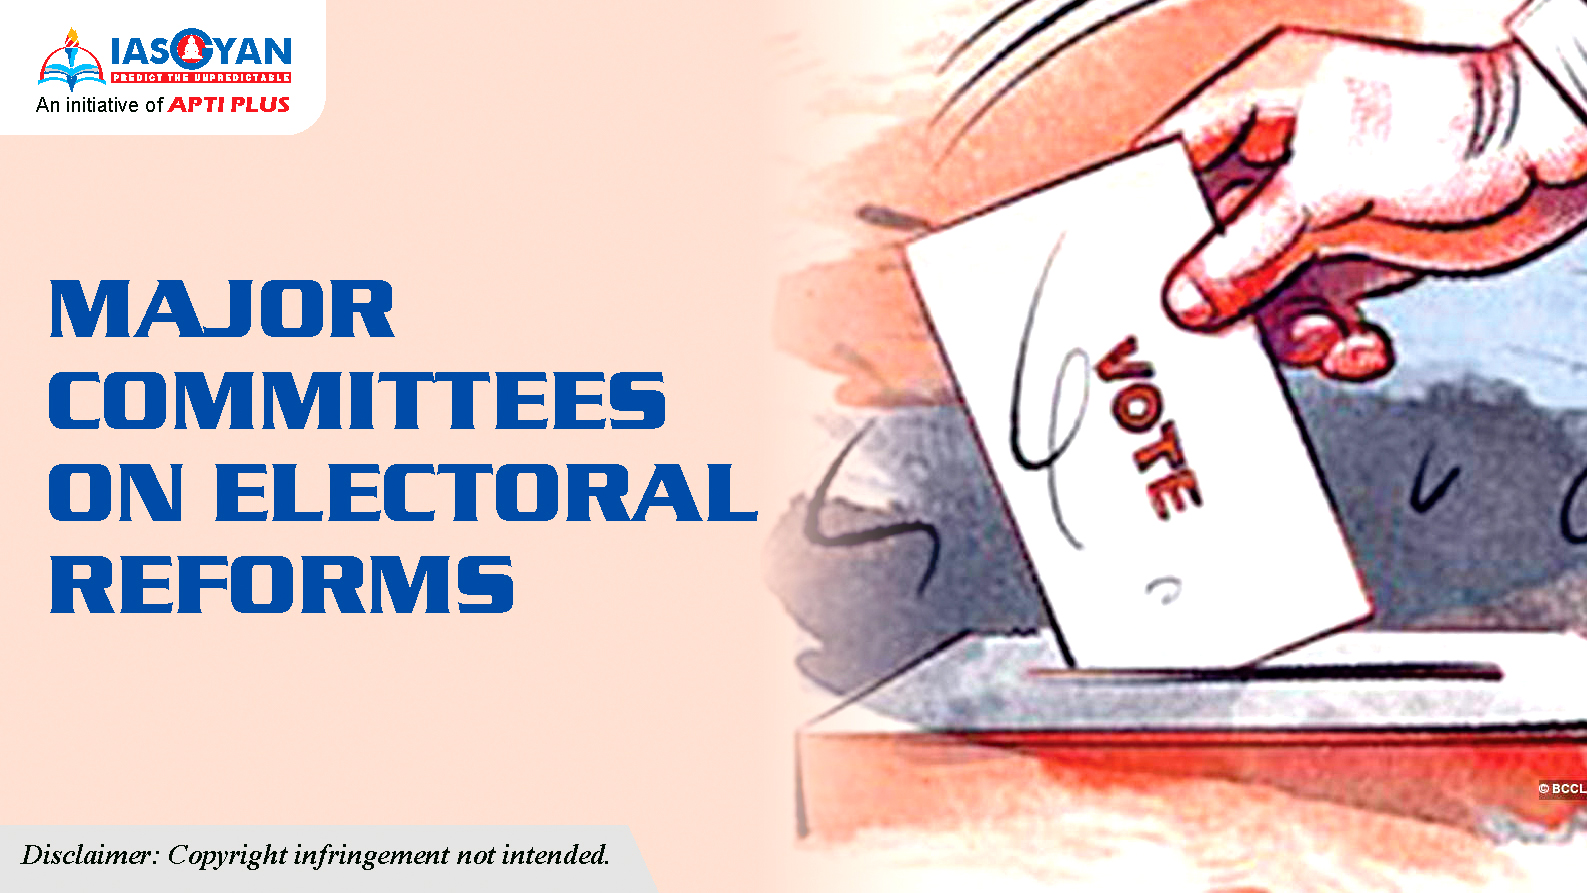 MAJOR COMMITTEES ON ELECTORAL REFORMS